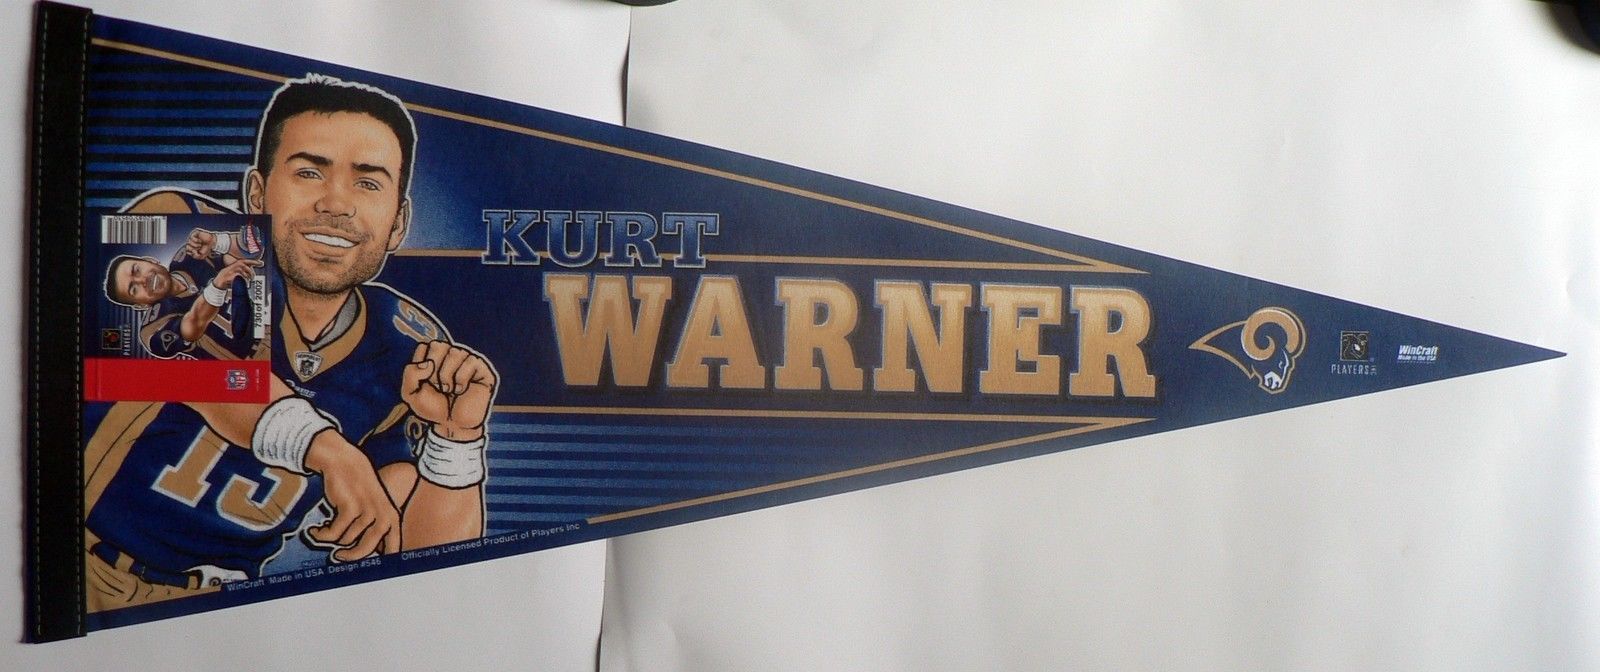 Primary image for ST LOUIS RAM NFL FOOTBALL PENNANT KURT WARNER NEW OLD STOCK SUPER BOWL CHAMPIONS